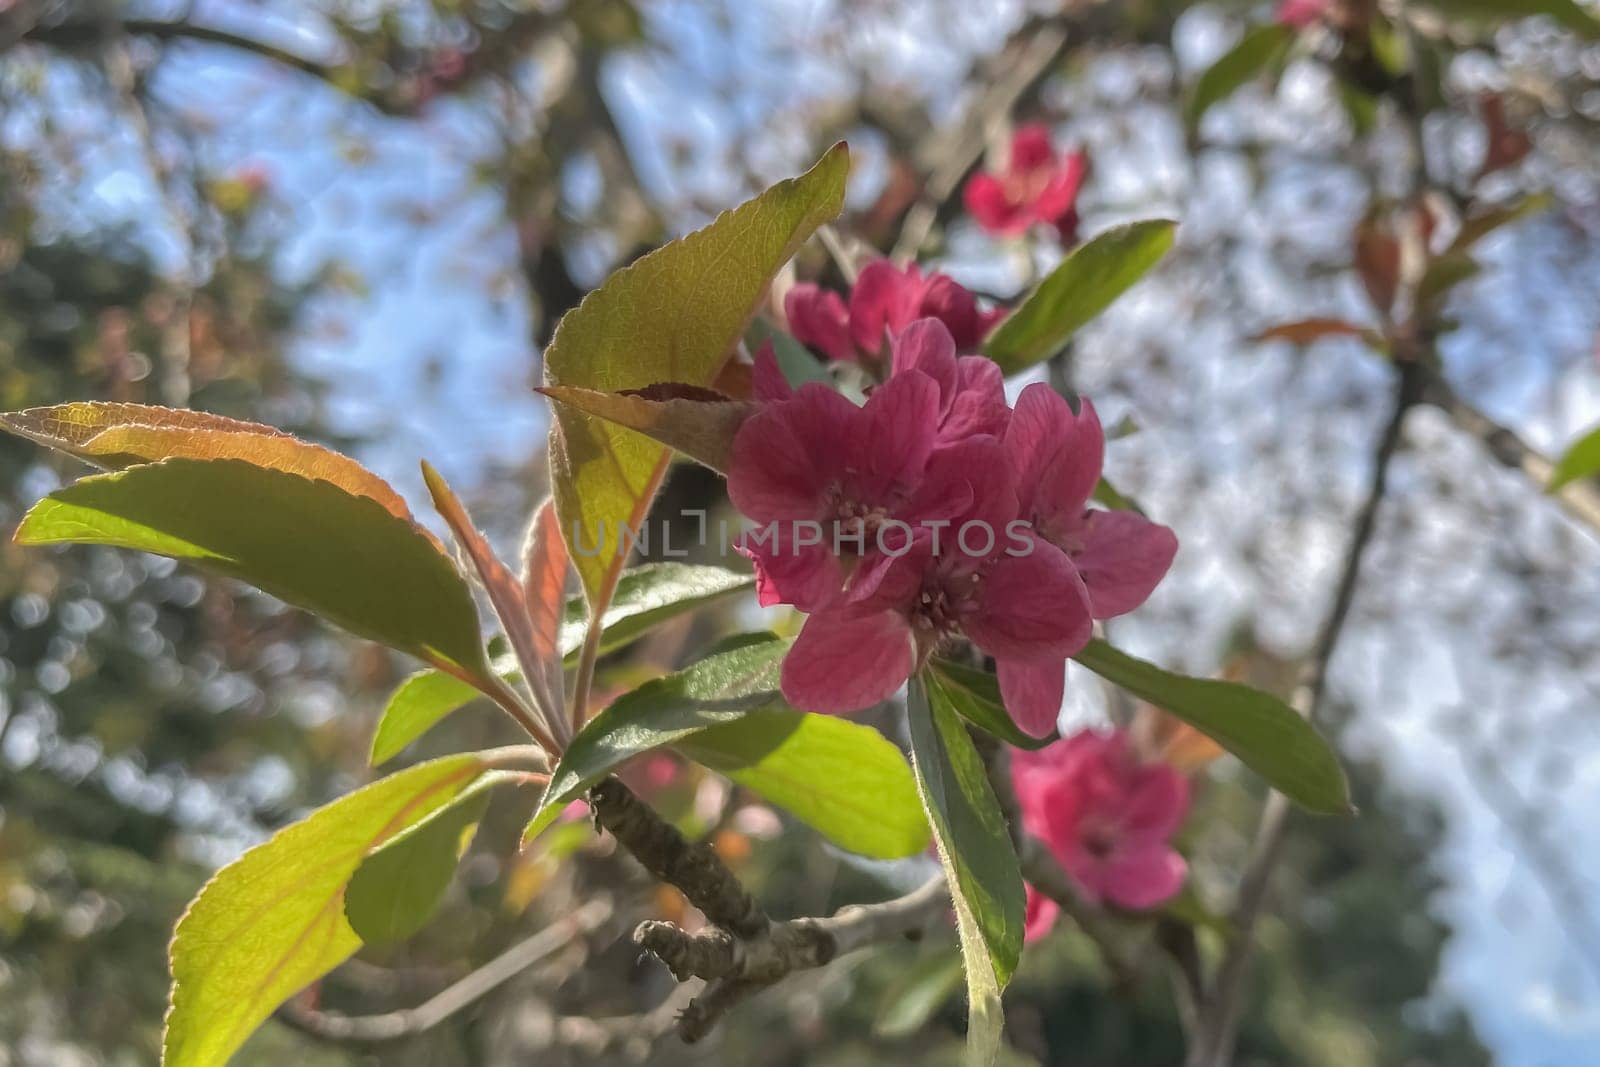 Colorful Spring. The Beauty of the Season with Blossoming Tree Branches. The Awakening of Nature. A Visual Feast Full of Blooming Tree Branches Giving the Good News of Spring.